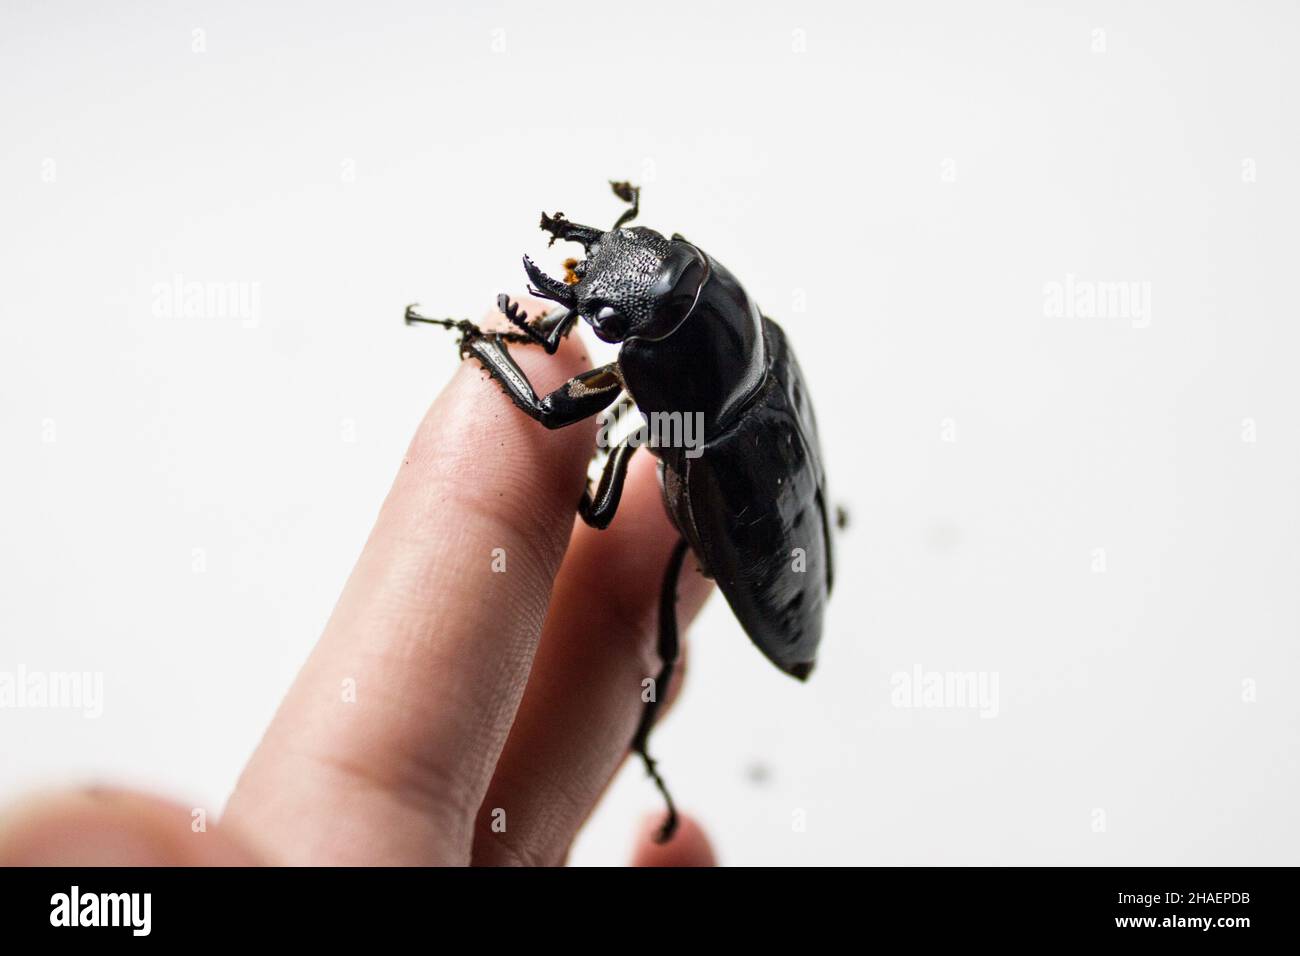 Lucanus cervus, the European stag beetle, is one of the best-known species of stag beetle family Lucanidae in Western Europe, and is the eponymous exa Stock Photo